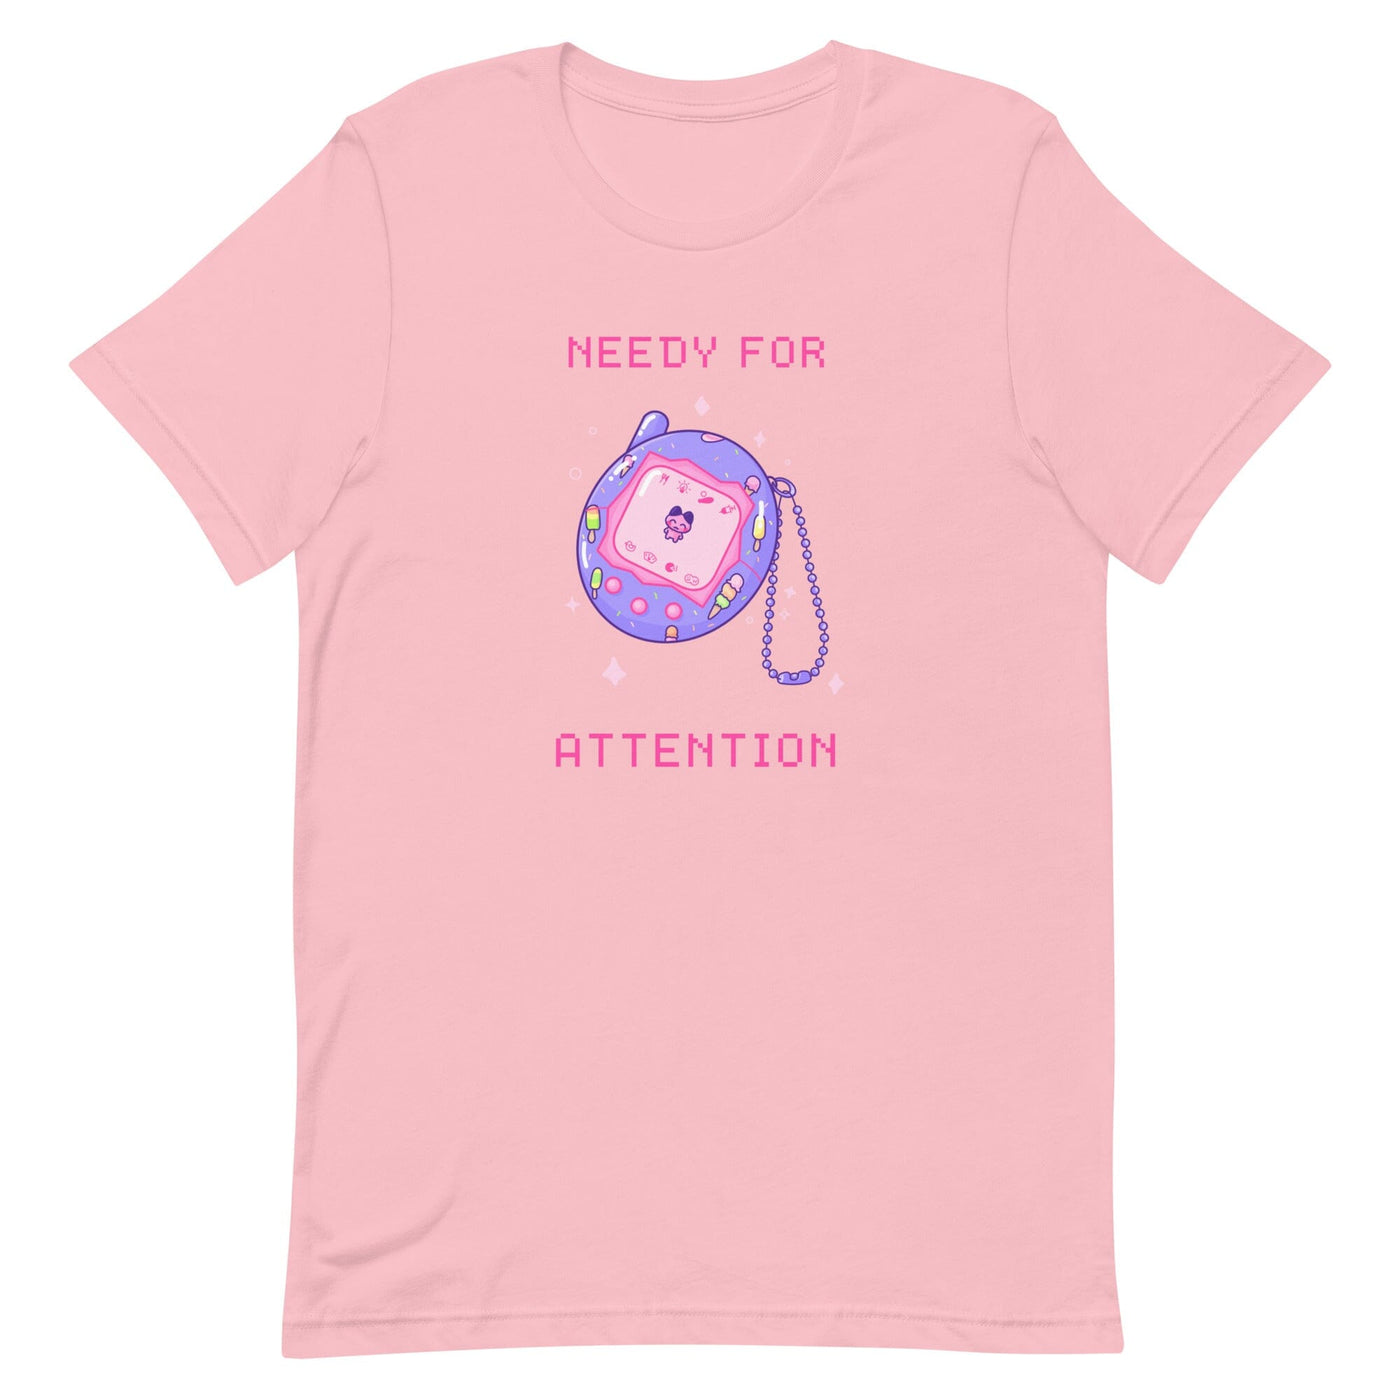 Needy for Atention | Unisex t-shirt | Retro Gaming Threads & Thistles Inventory Pink S 